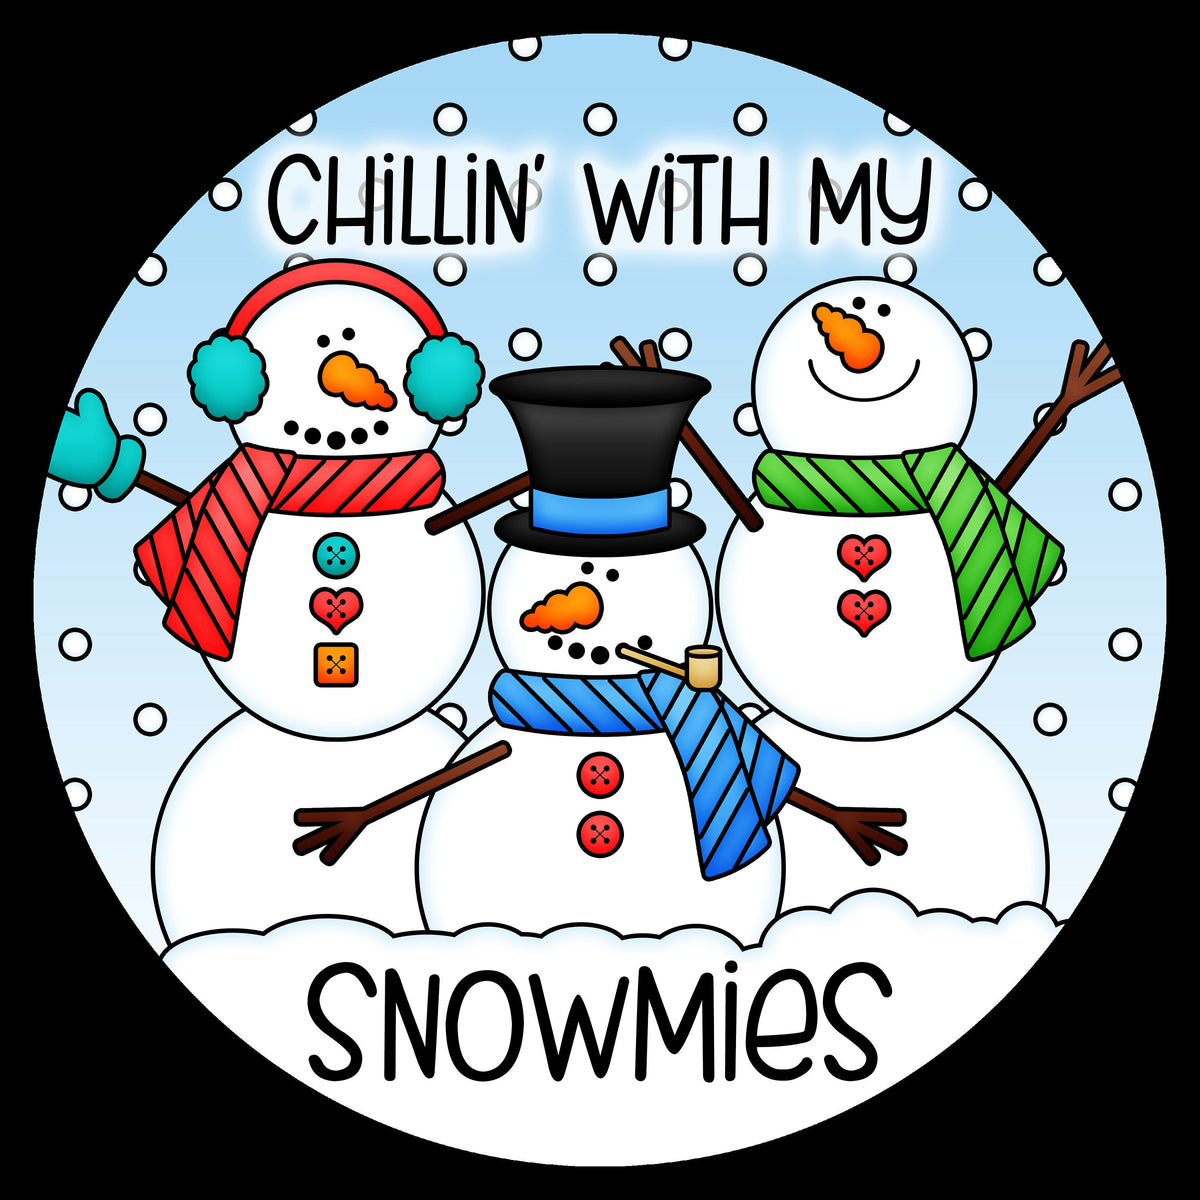 Chillin' with my Snowmies